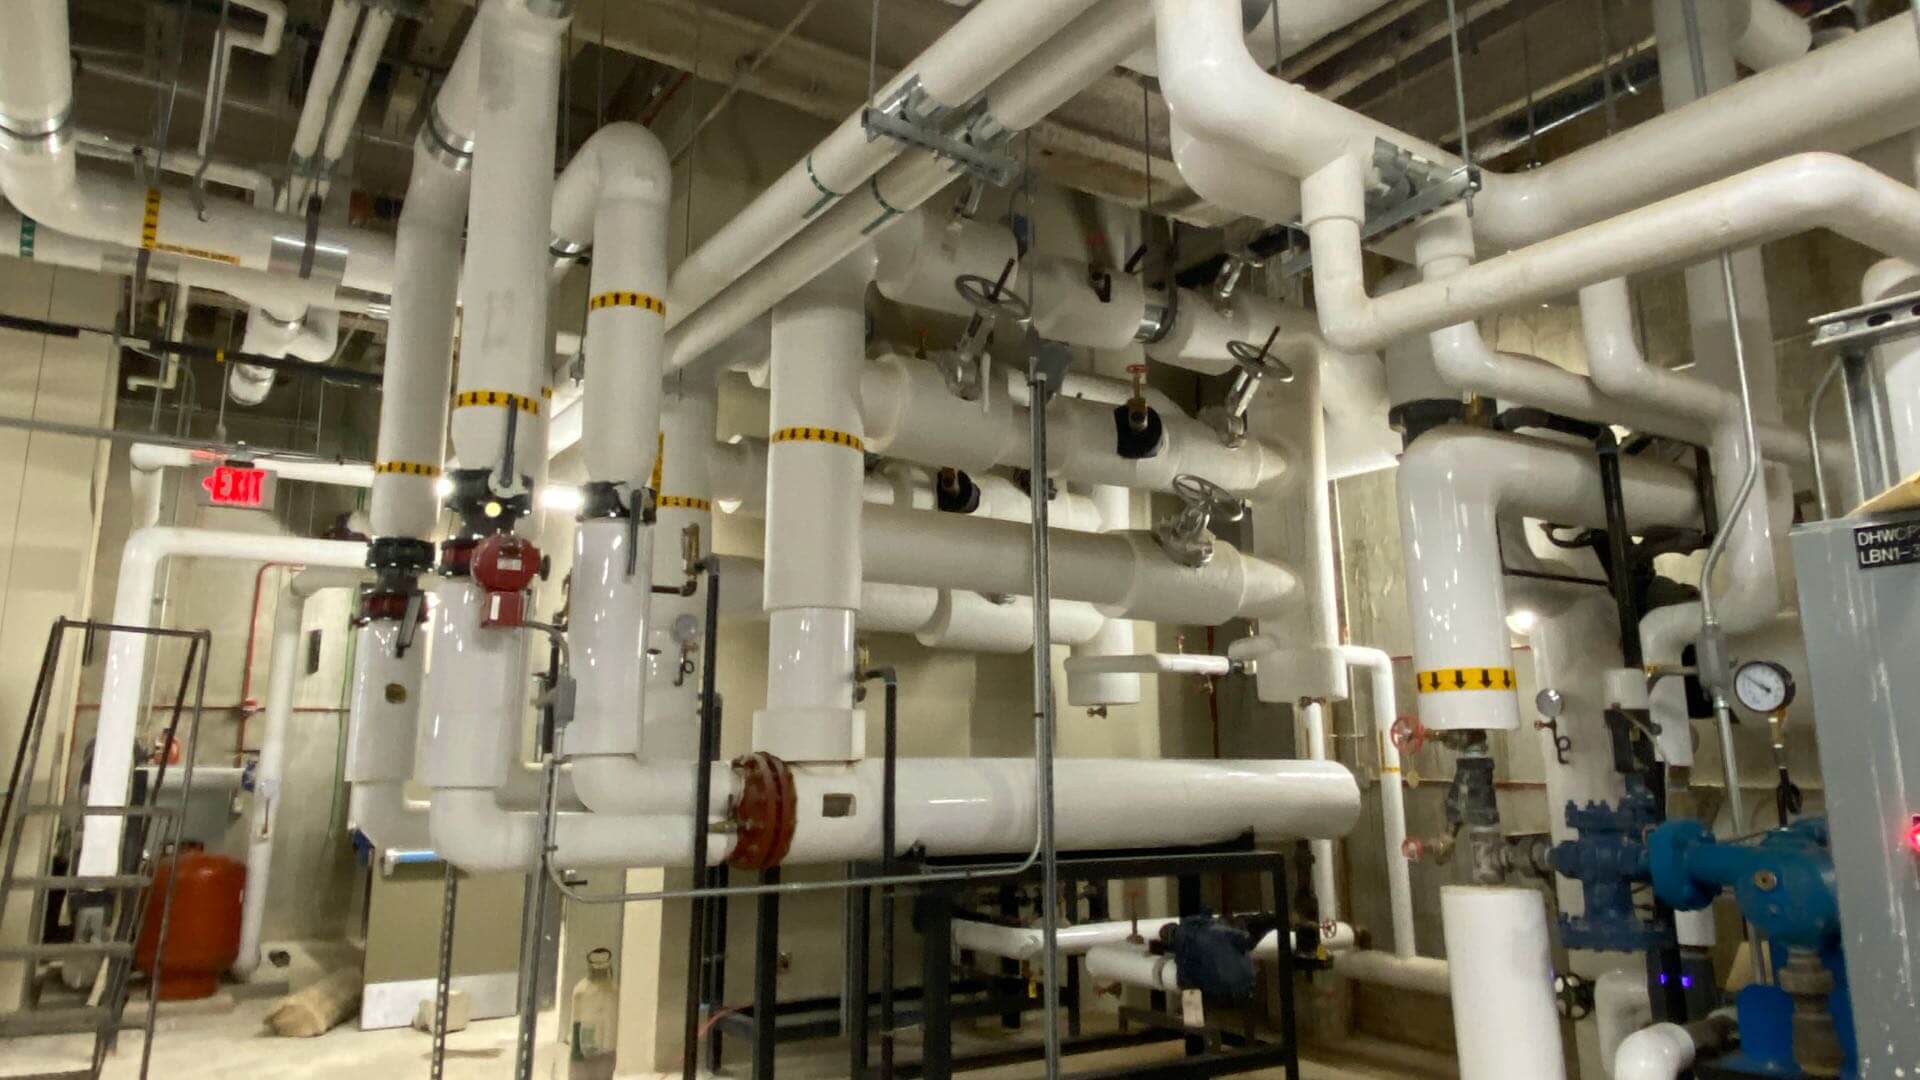 Interior of mechanical room with large maze like pipes